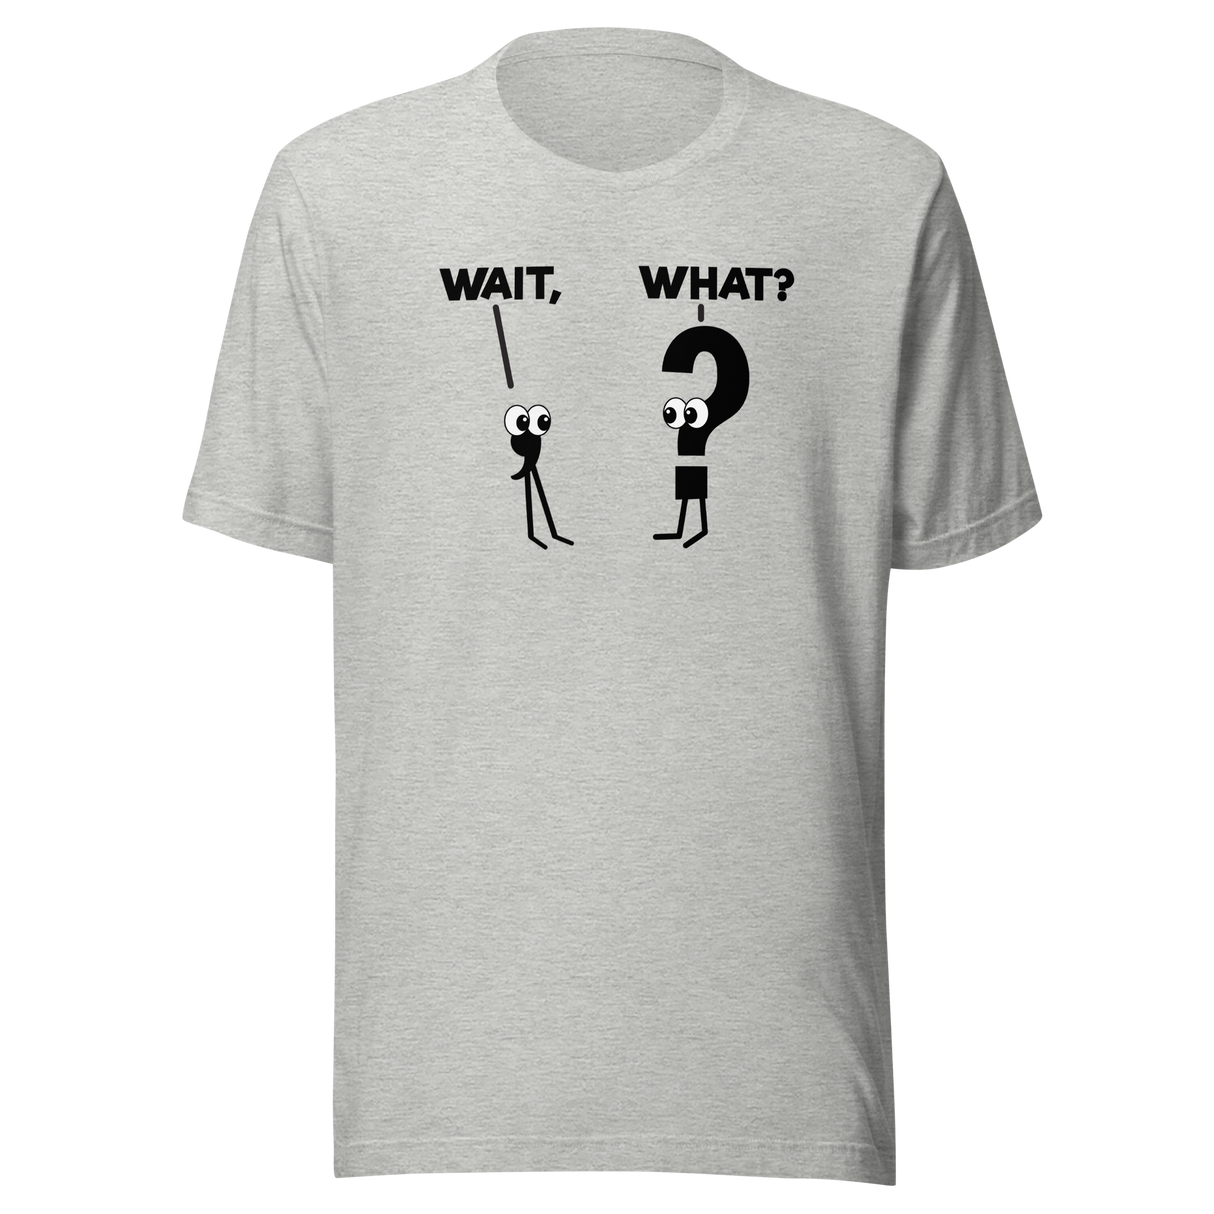 wait-what-comma-question-mark-everything-else-tee-confusion-t-shirt-surprise-tee-curiosity-t-shirt-bewilderment-tee#color_athletic-heather